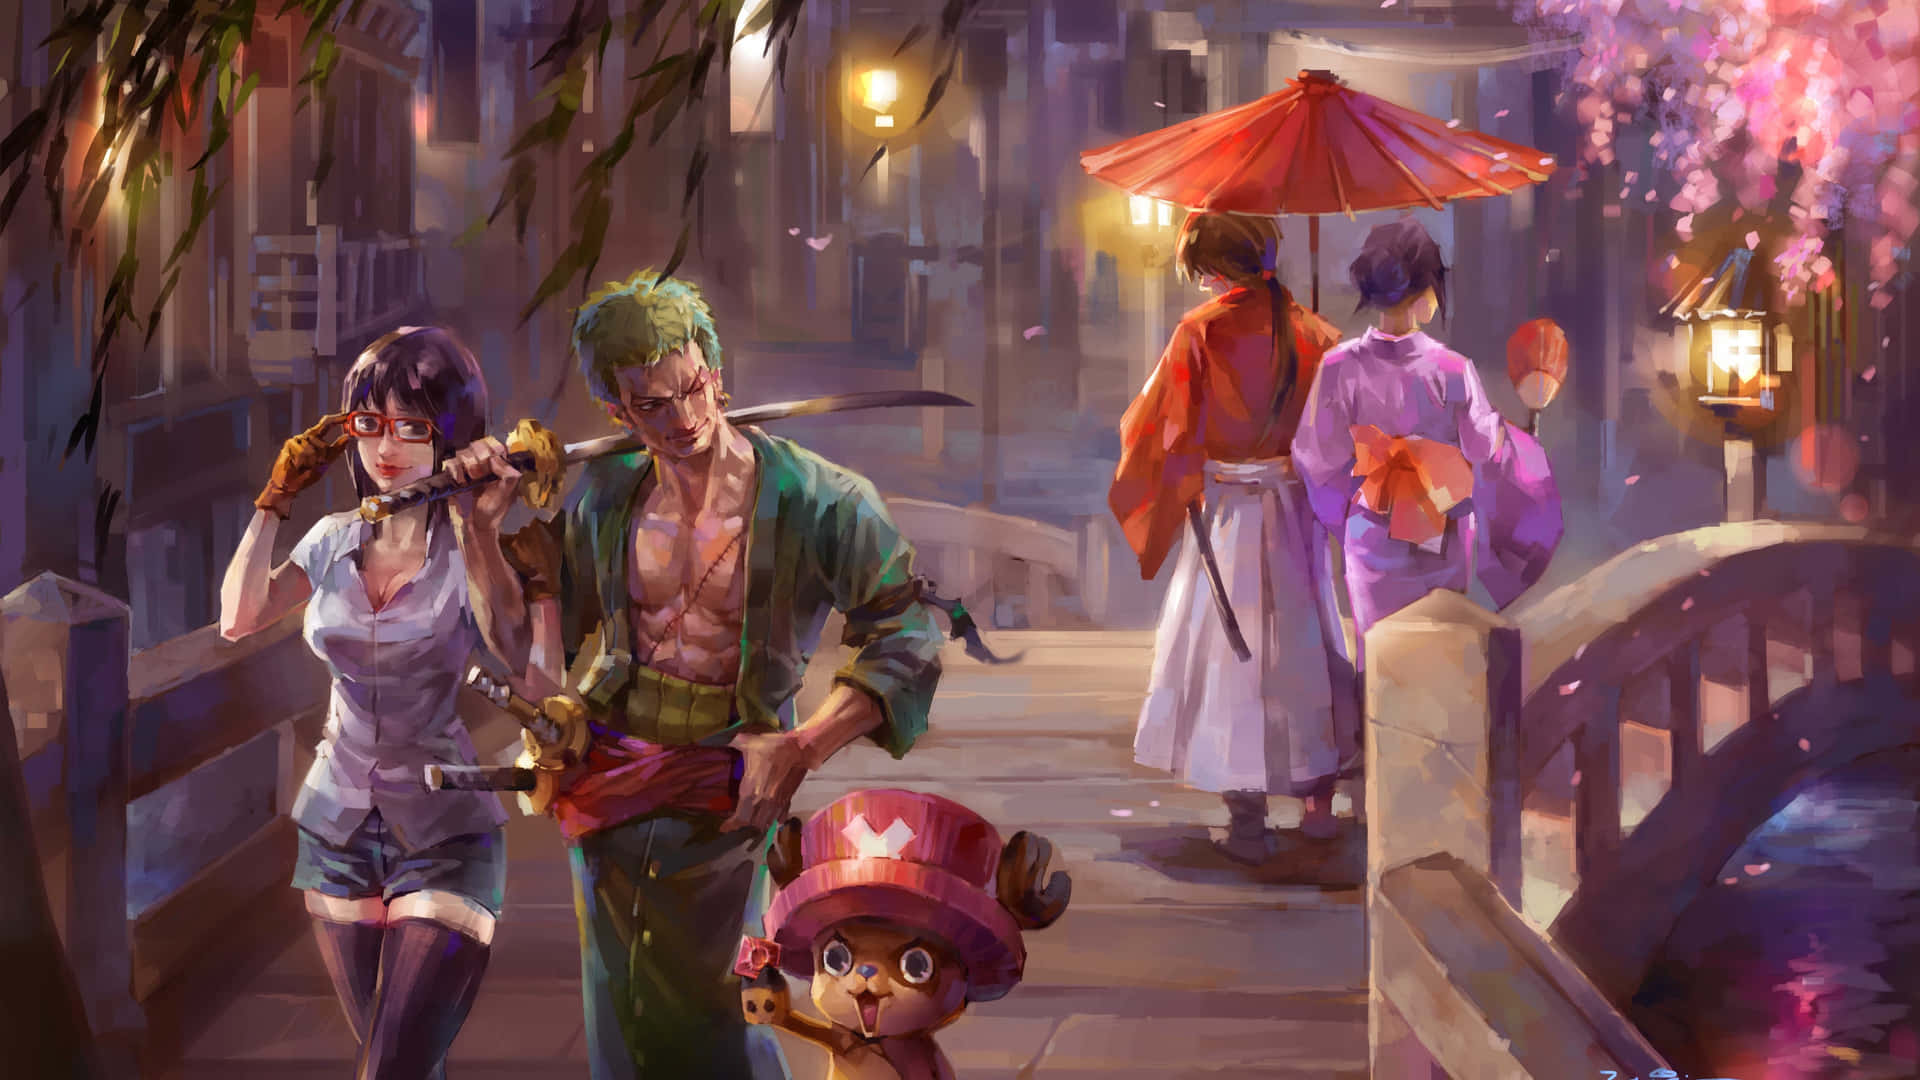 Prepare for adventure on the Grand Line with Luffy and the Straw Hat Pirates in "One Piece 5k" Wallpaper